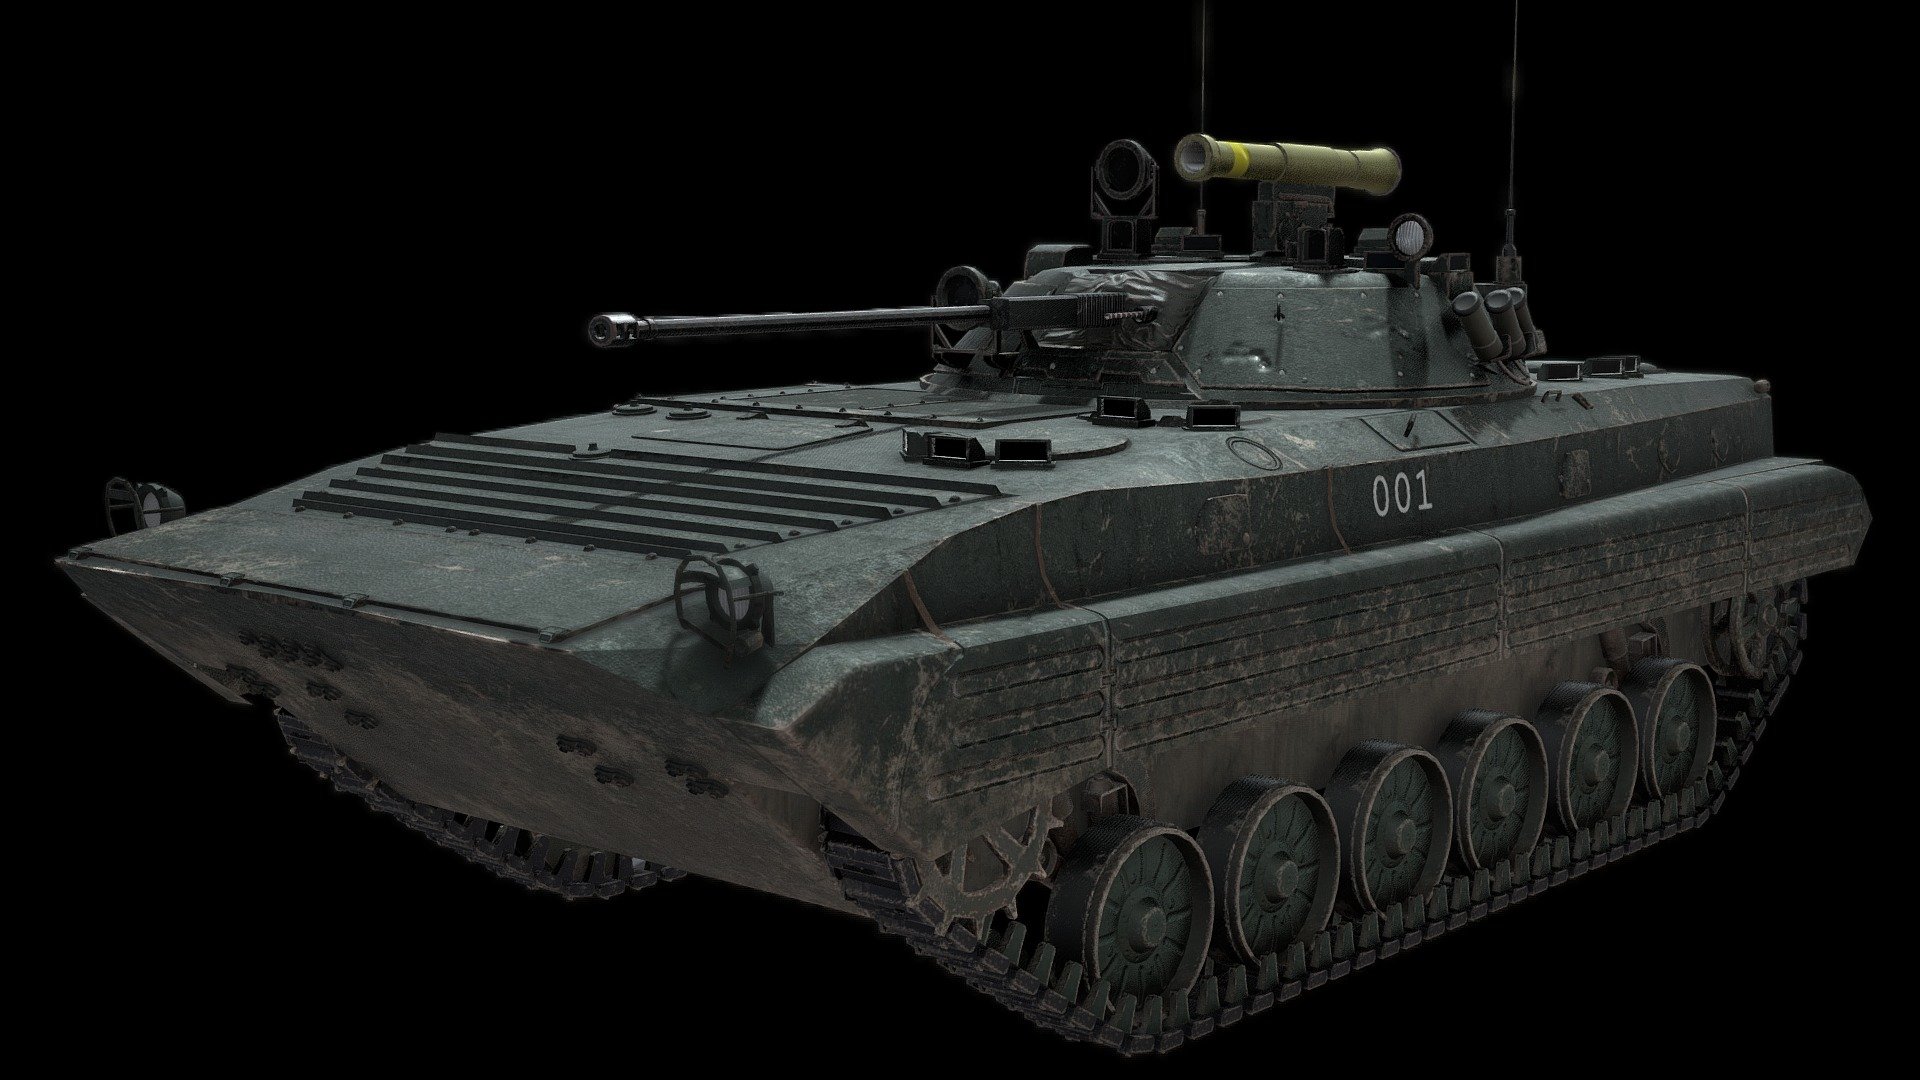 BMP-2 transport

3 x 2048 Textures

-Body
-Turret
-Tracks - BMP-2 - 3D model by DustyMojito 3d model